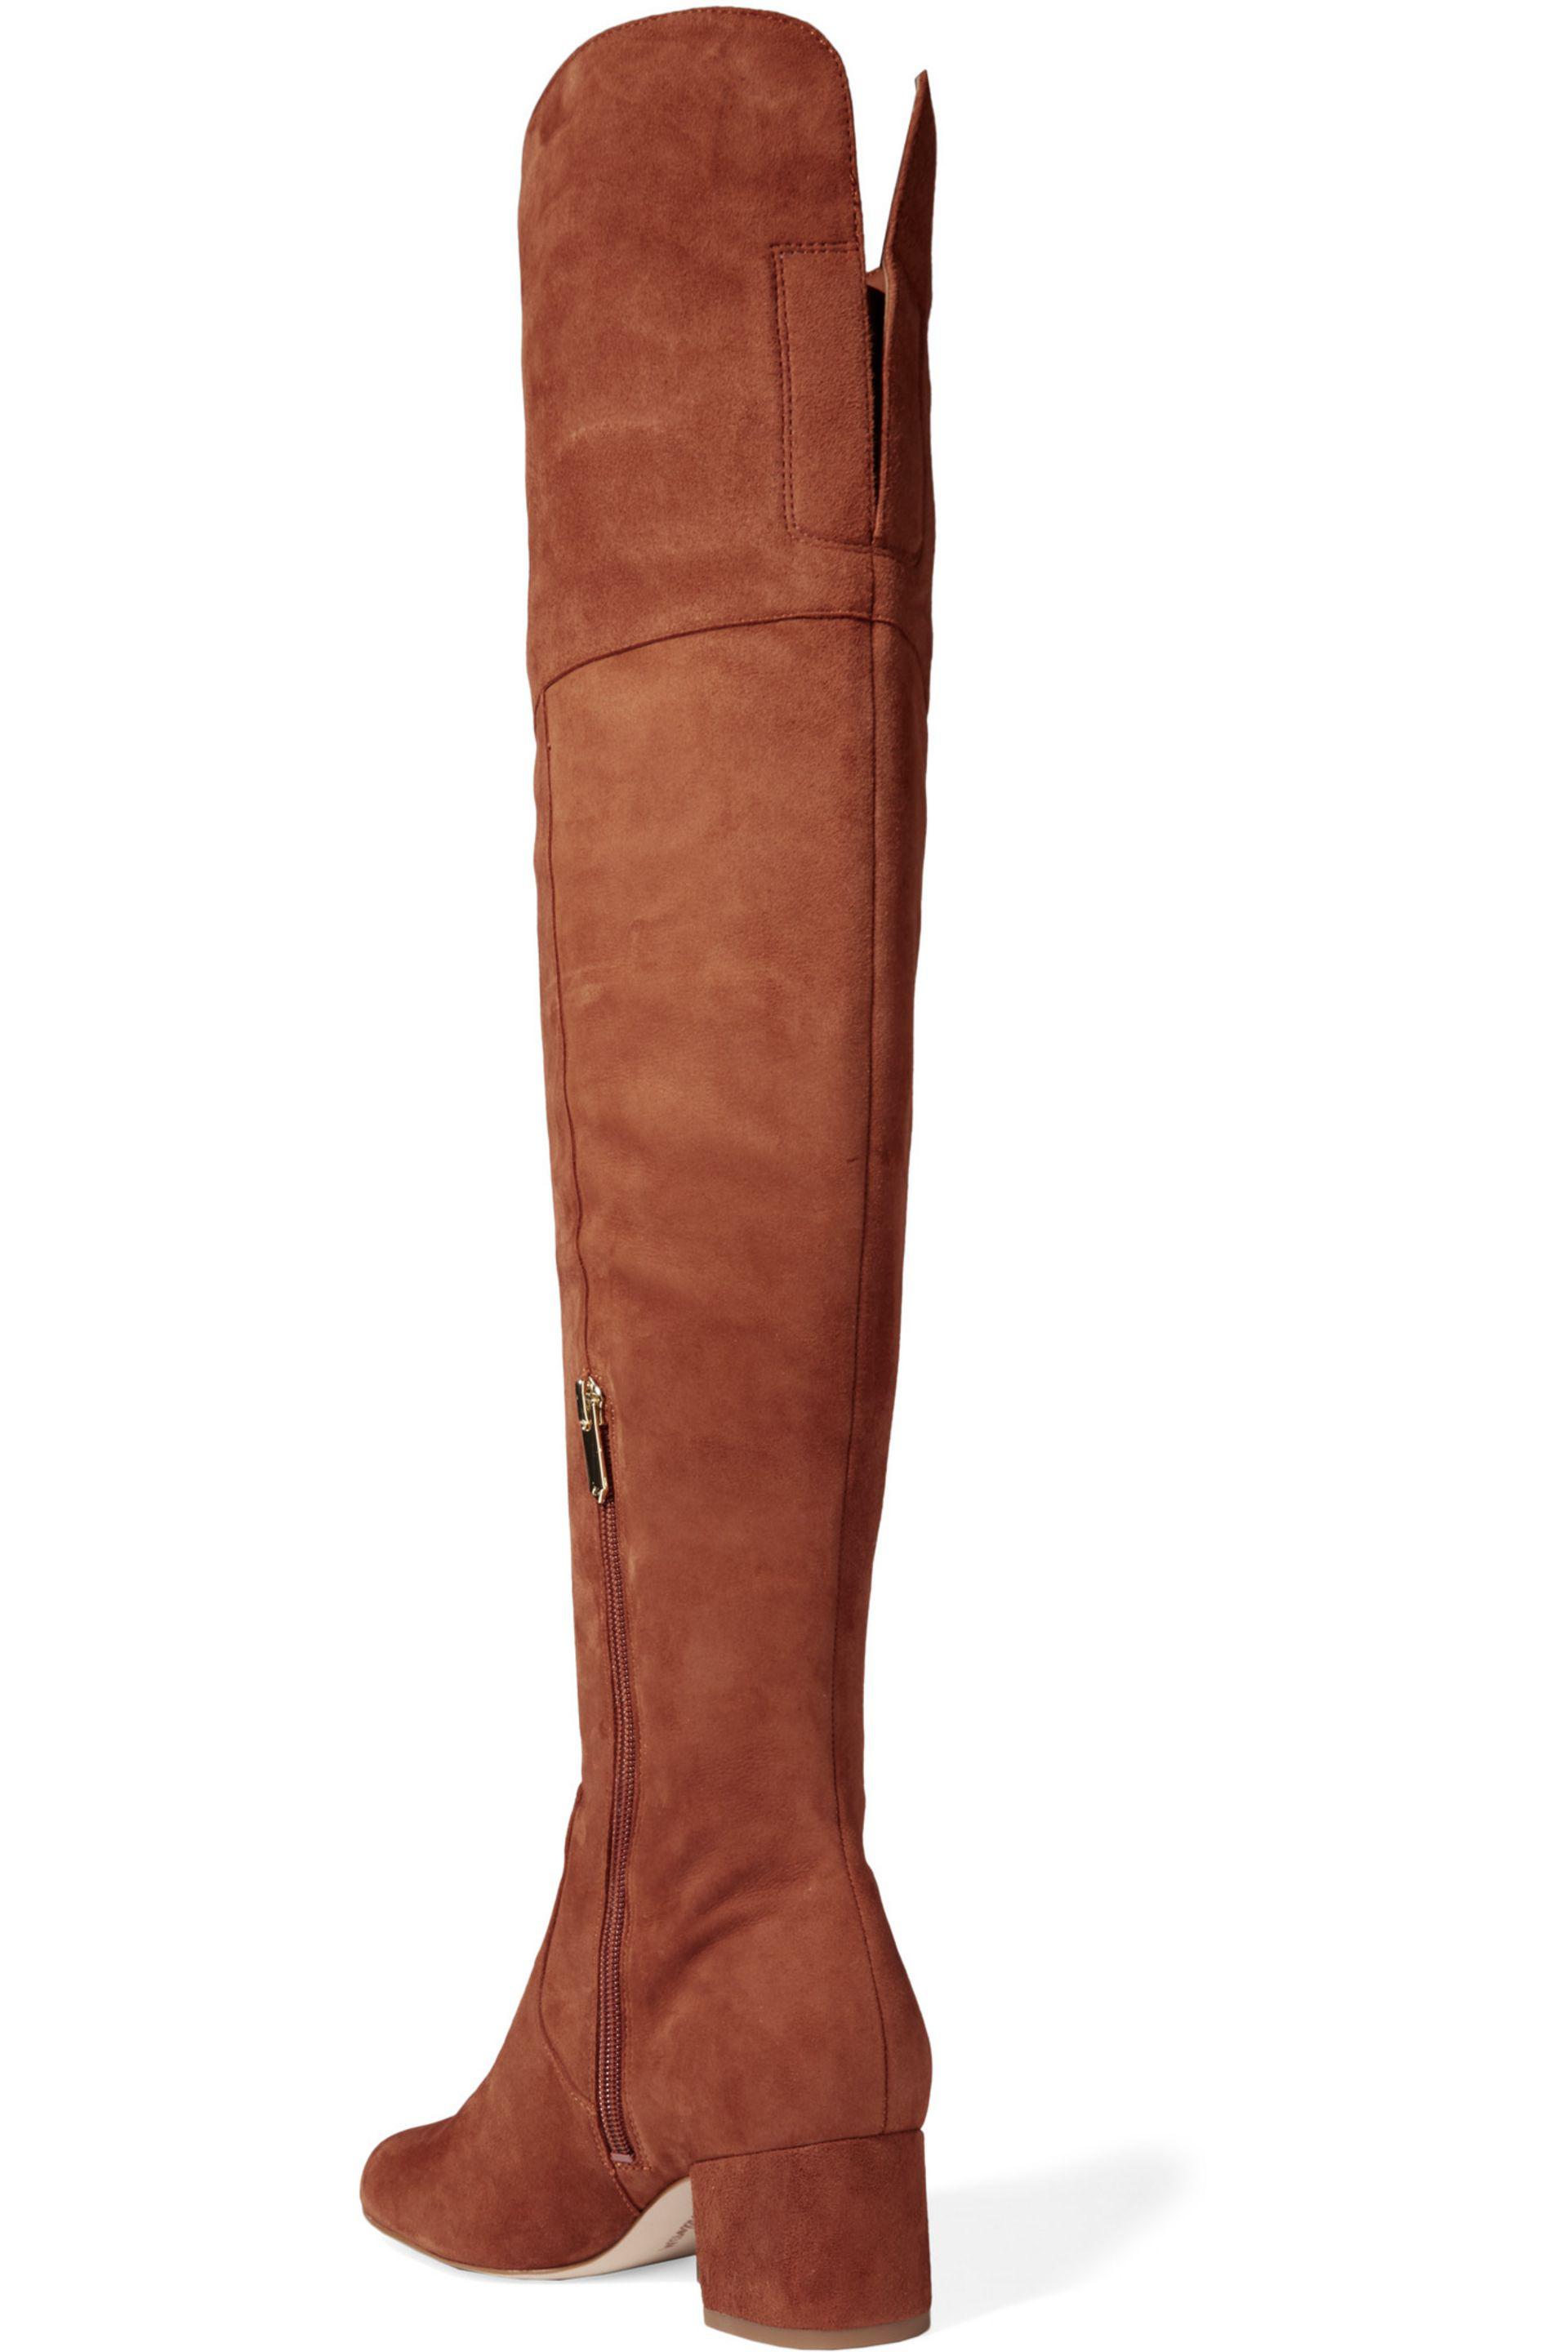 Sam Edelman Elina Suede Over-the-knee Boots in Brown - Lyst